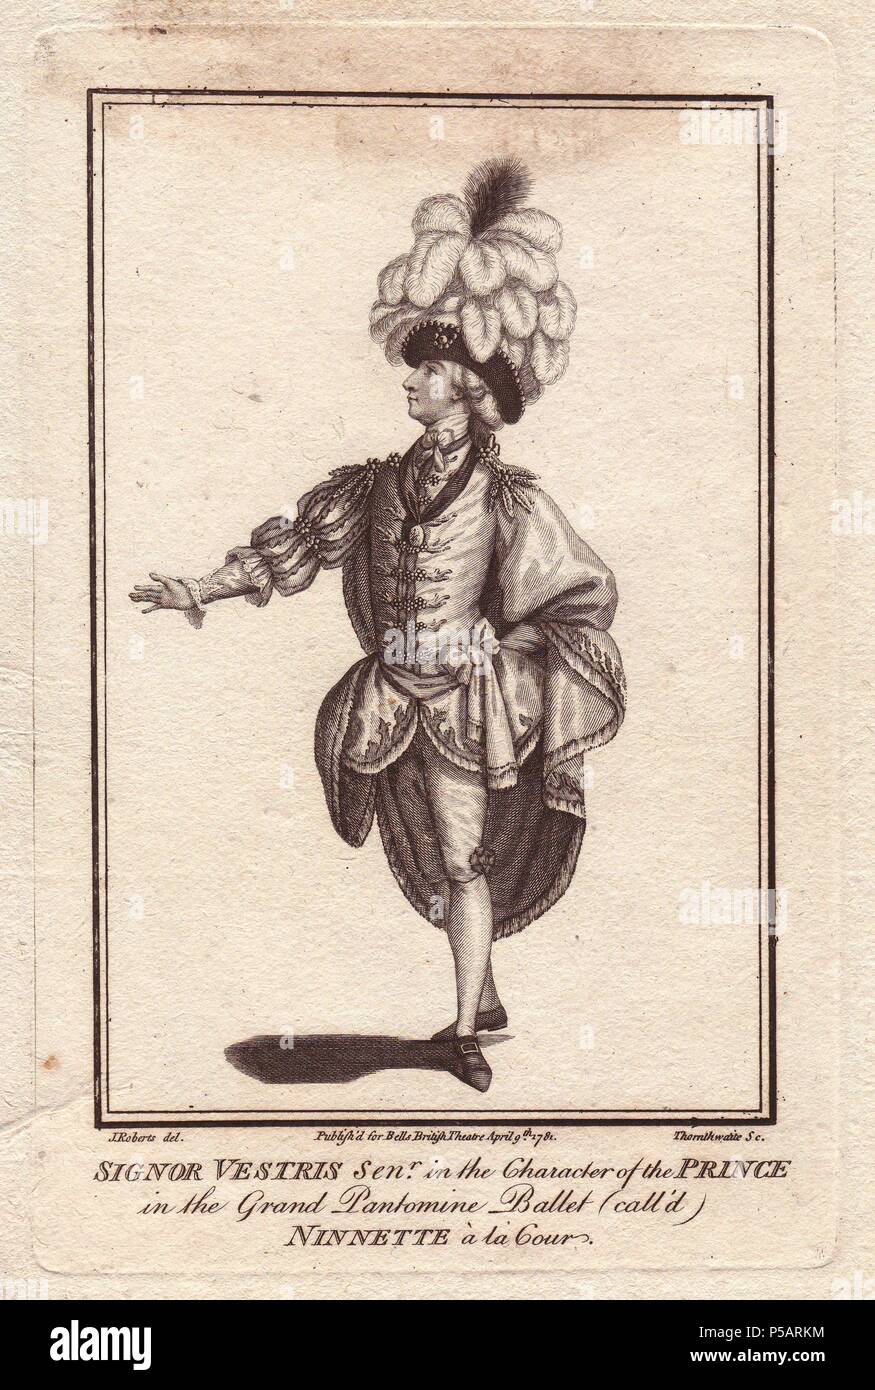 Signor Vestris Senior as the Prince in the grand pantomime ballet 'Ninette a la Cour.'. . Gaetan or Gaetano Vestris (1729–1808) was a celebrated French dancer and mime, husband to the German dancer and singer Ann Heinel, and illegitimate father to Auguste Vestris Jr. Ballet master at the Paris Opera, he debuted in 1781 in London and was called the 'God of the Dance' by his followers.. . Illustration by J. Roberts, copperplate engraving by Thornthwaite, from 'Bell's British Theatre' 1781. Stock Photo